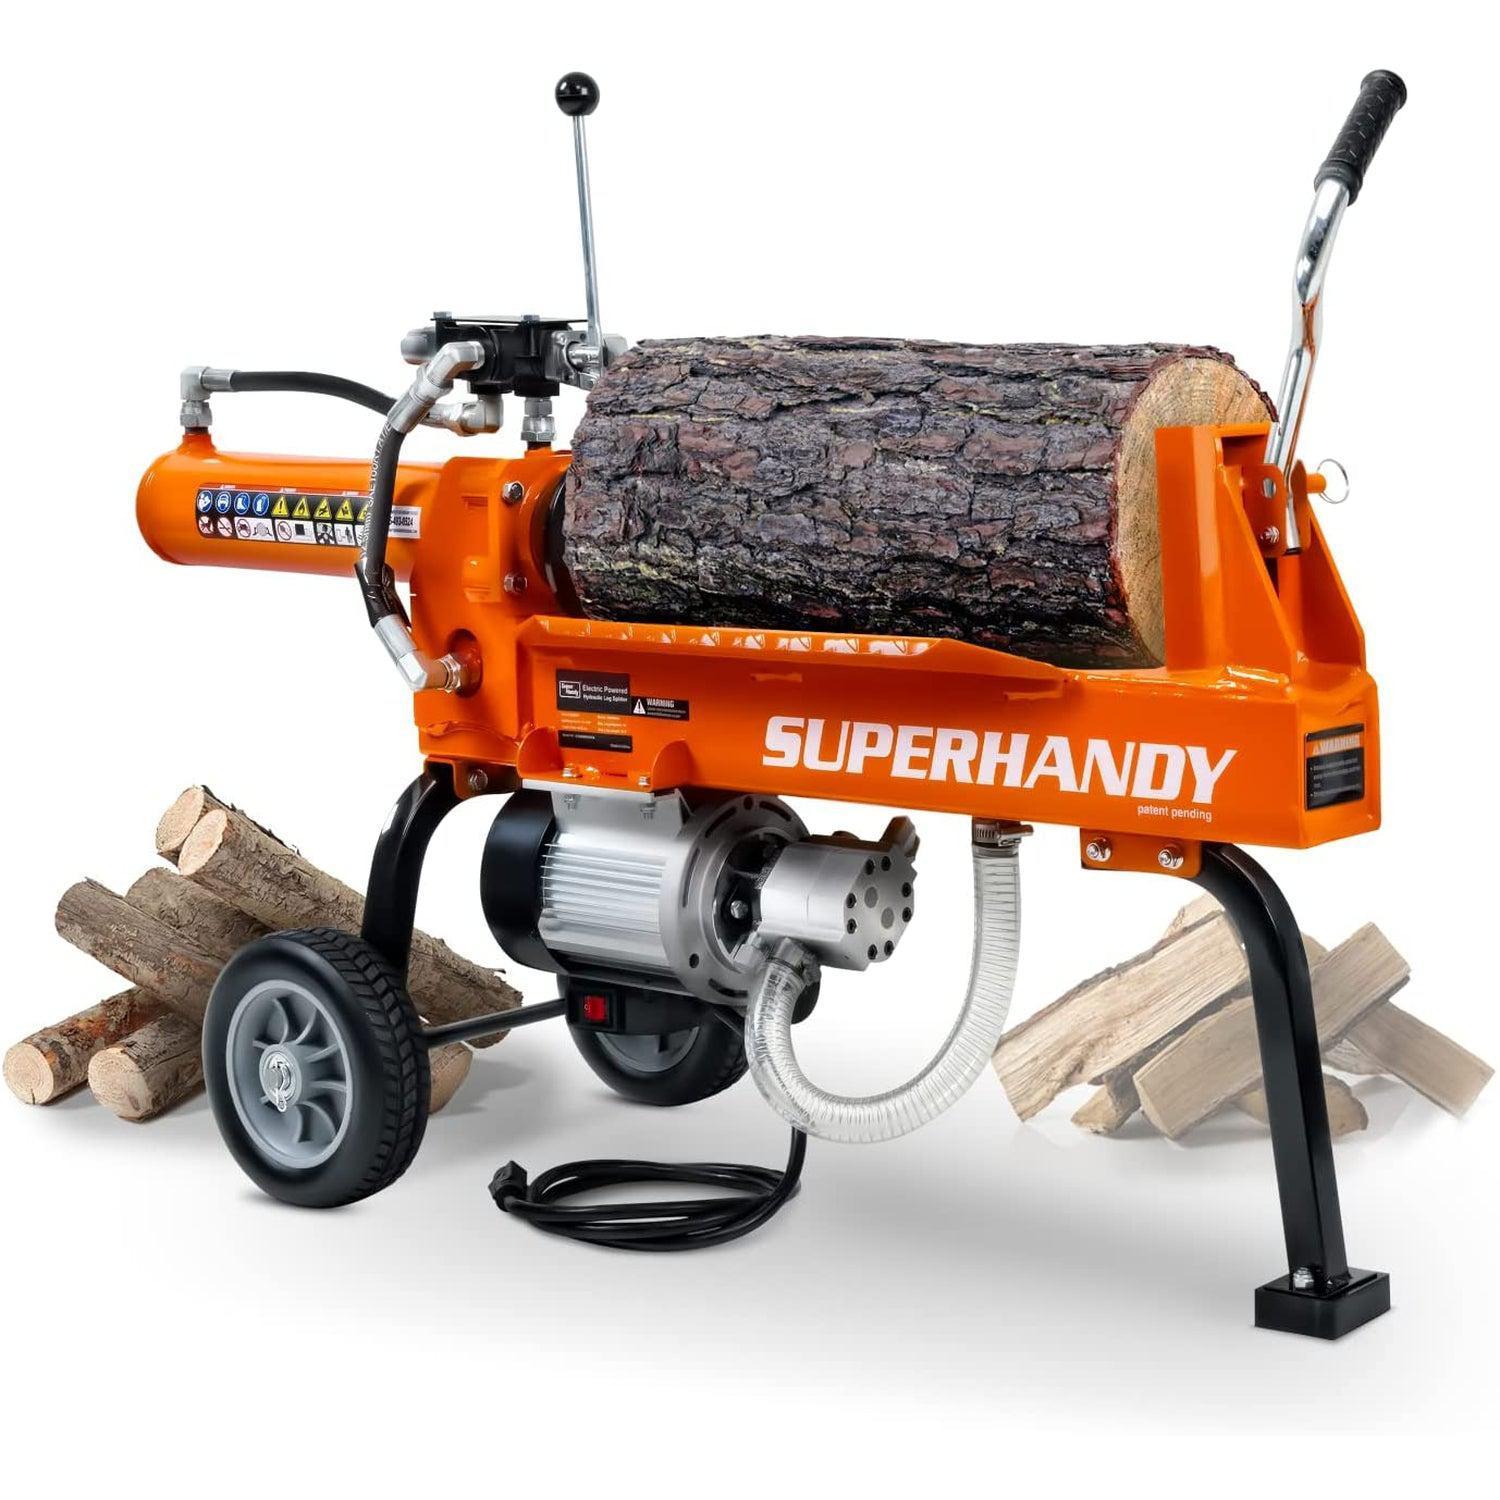 SuperHandy Portable Electric Log Splitter - 120V Corded, 14-Ton Hydraulic System, Max 14" Log Diameter - DIY Tools by GreatCircleUS